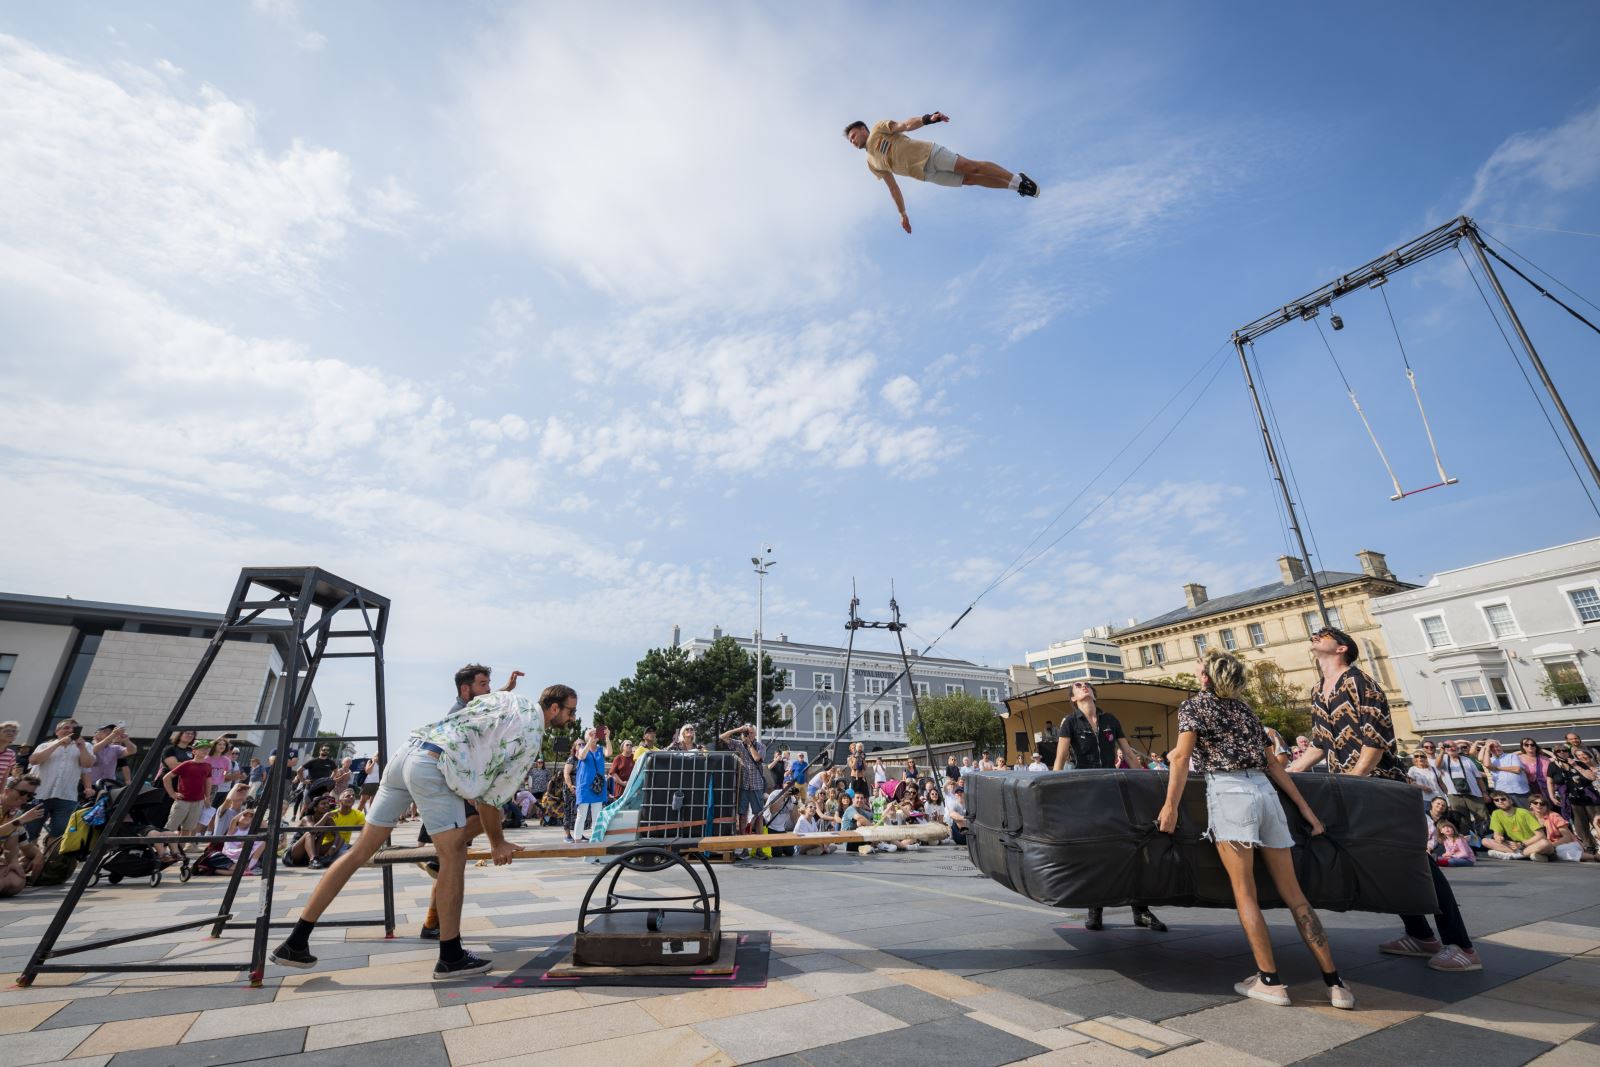 An acrobat high in the sky above some apparatus and a crowd of spectators